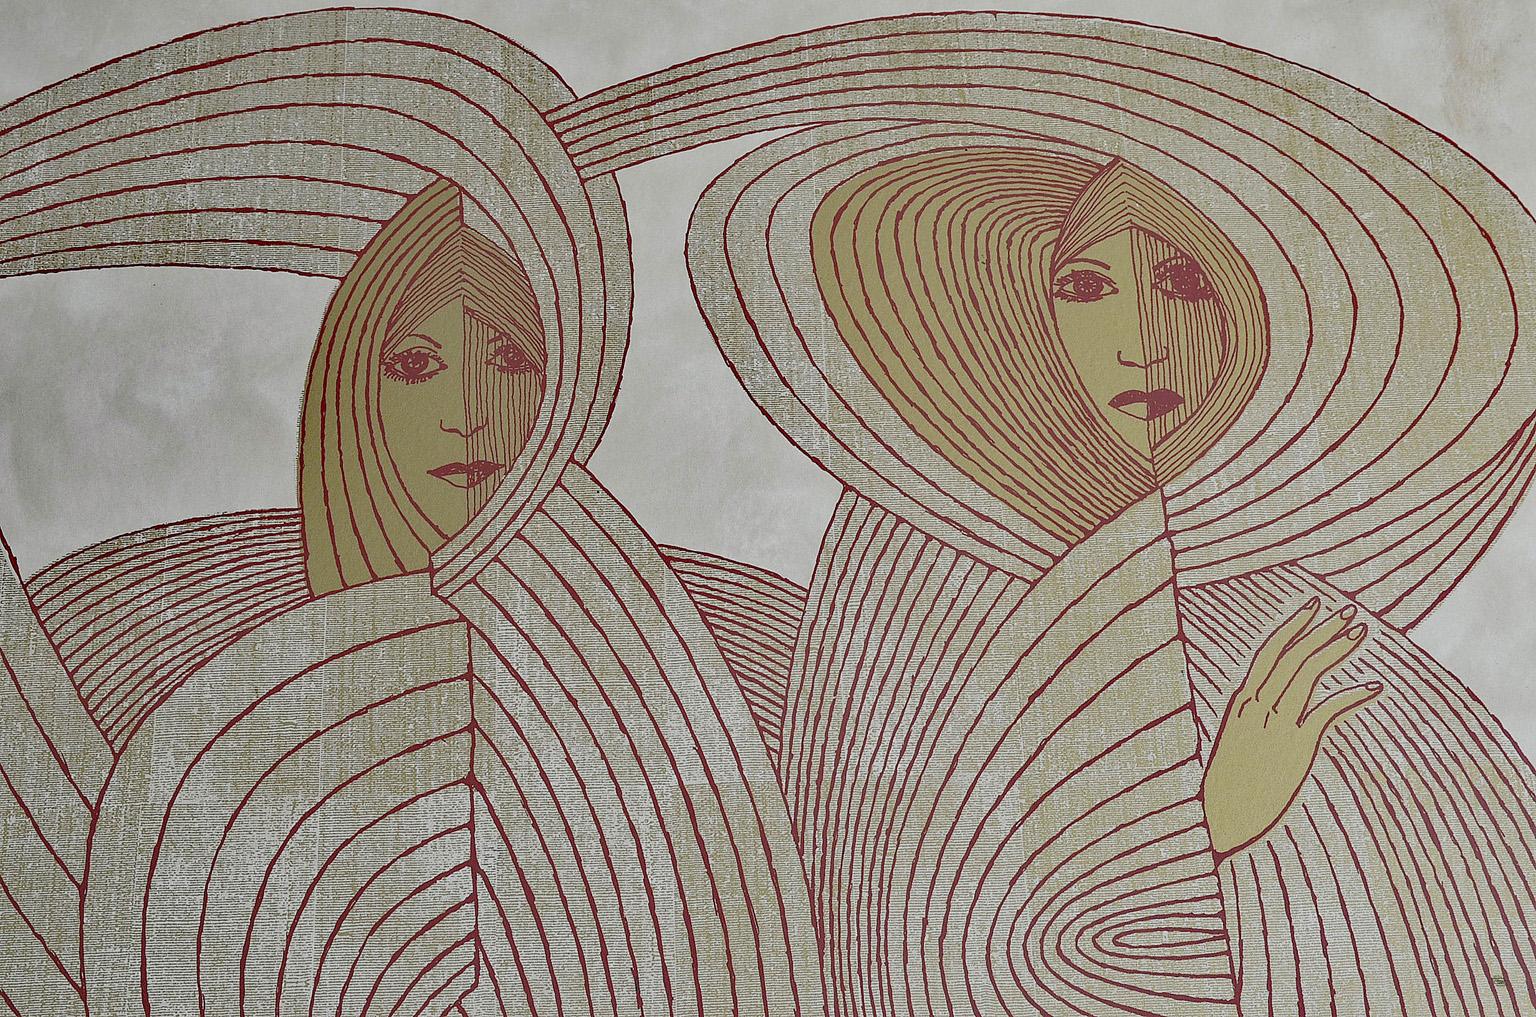 The veiled virgins room divider or wall covering by Jack Denst, 1976.
This vintage room divider or wall covering titled The Veiled Virgins, designed and produced by Jack Denst USA in Chicago in 1976, is made of wallpaper on fiberboard.
Marked: